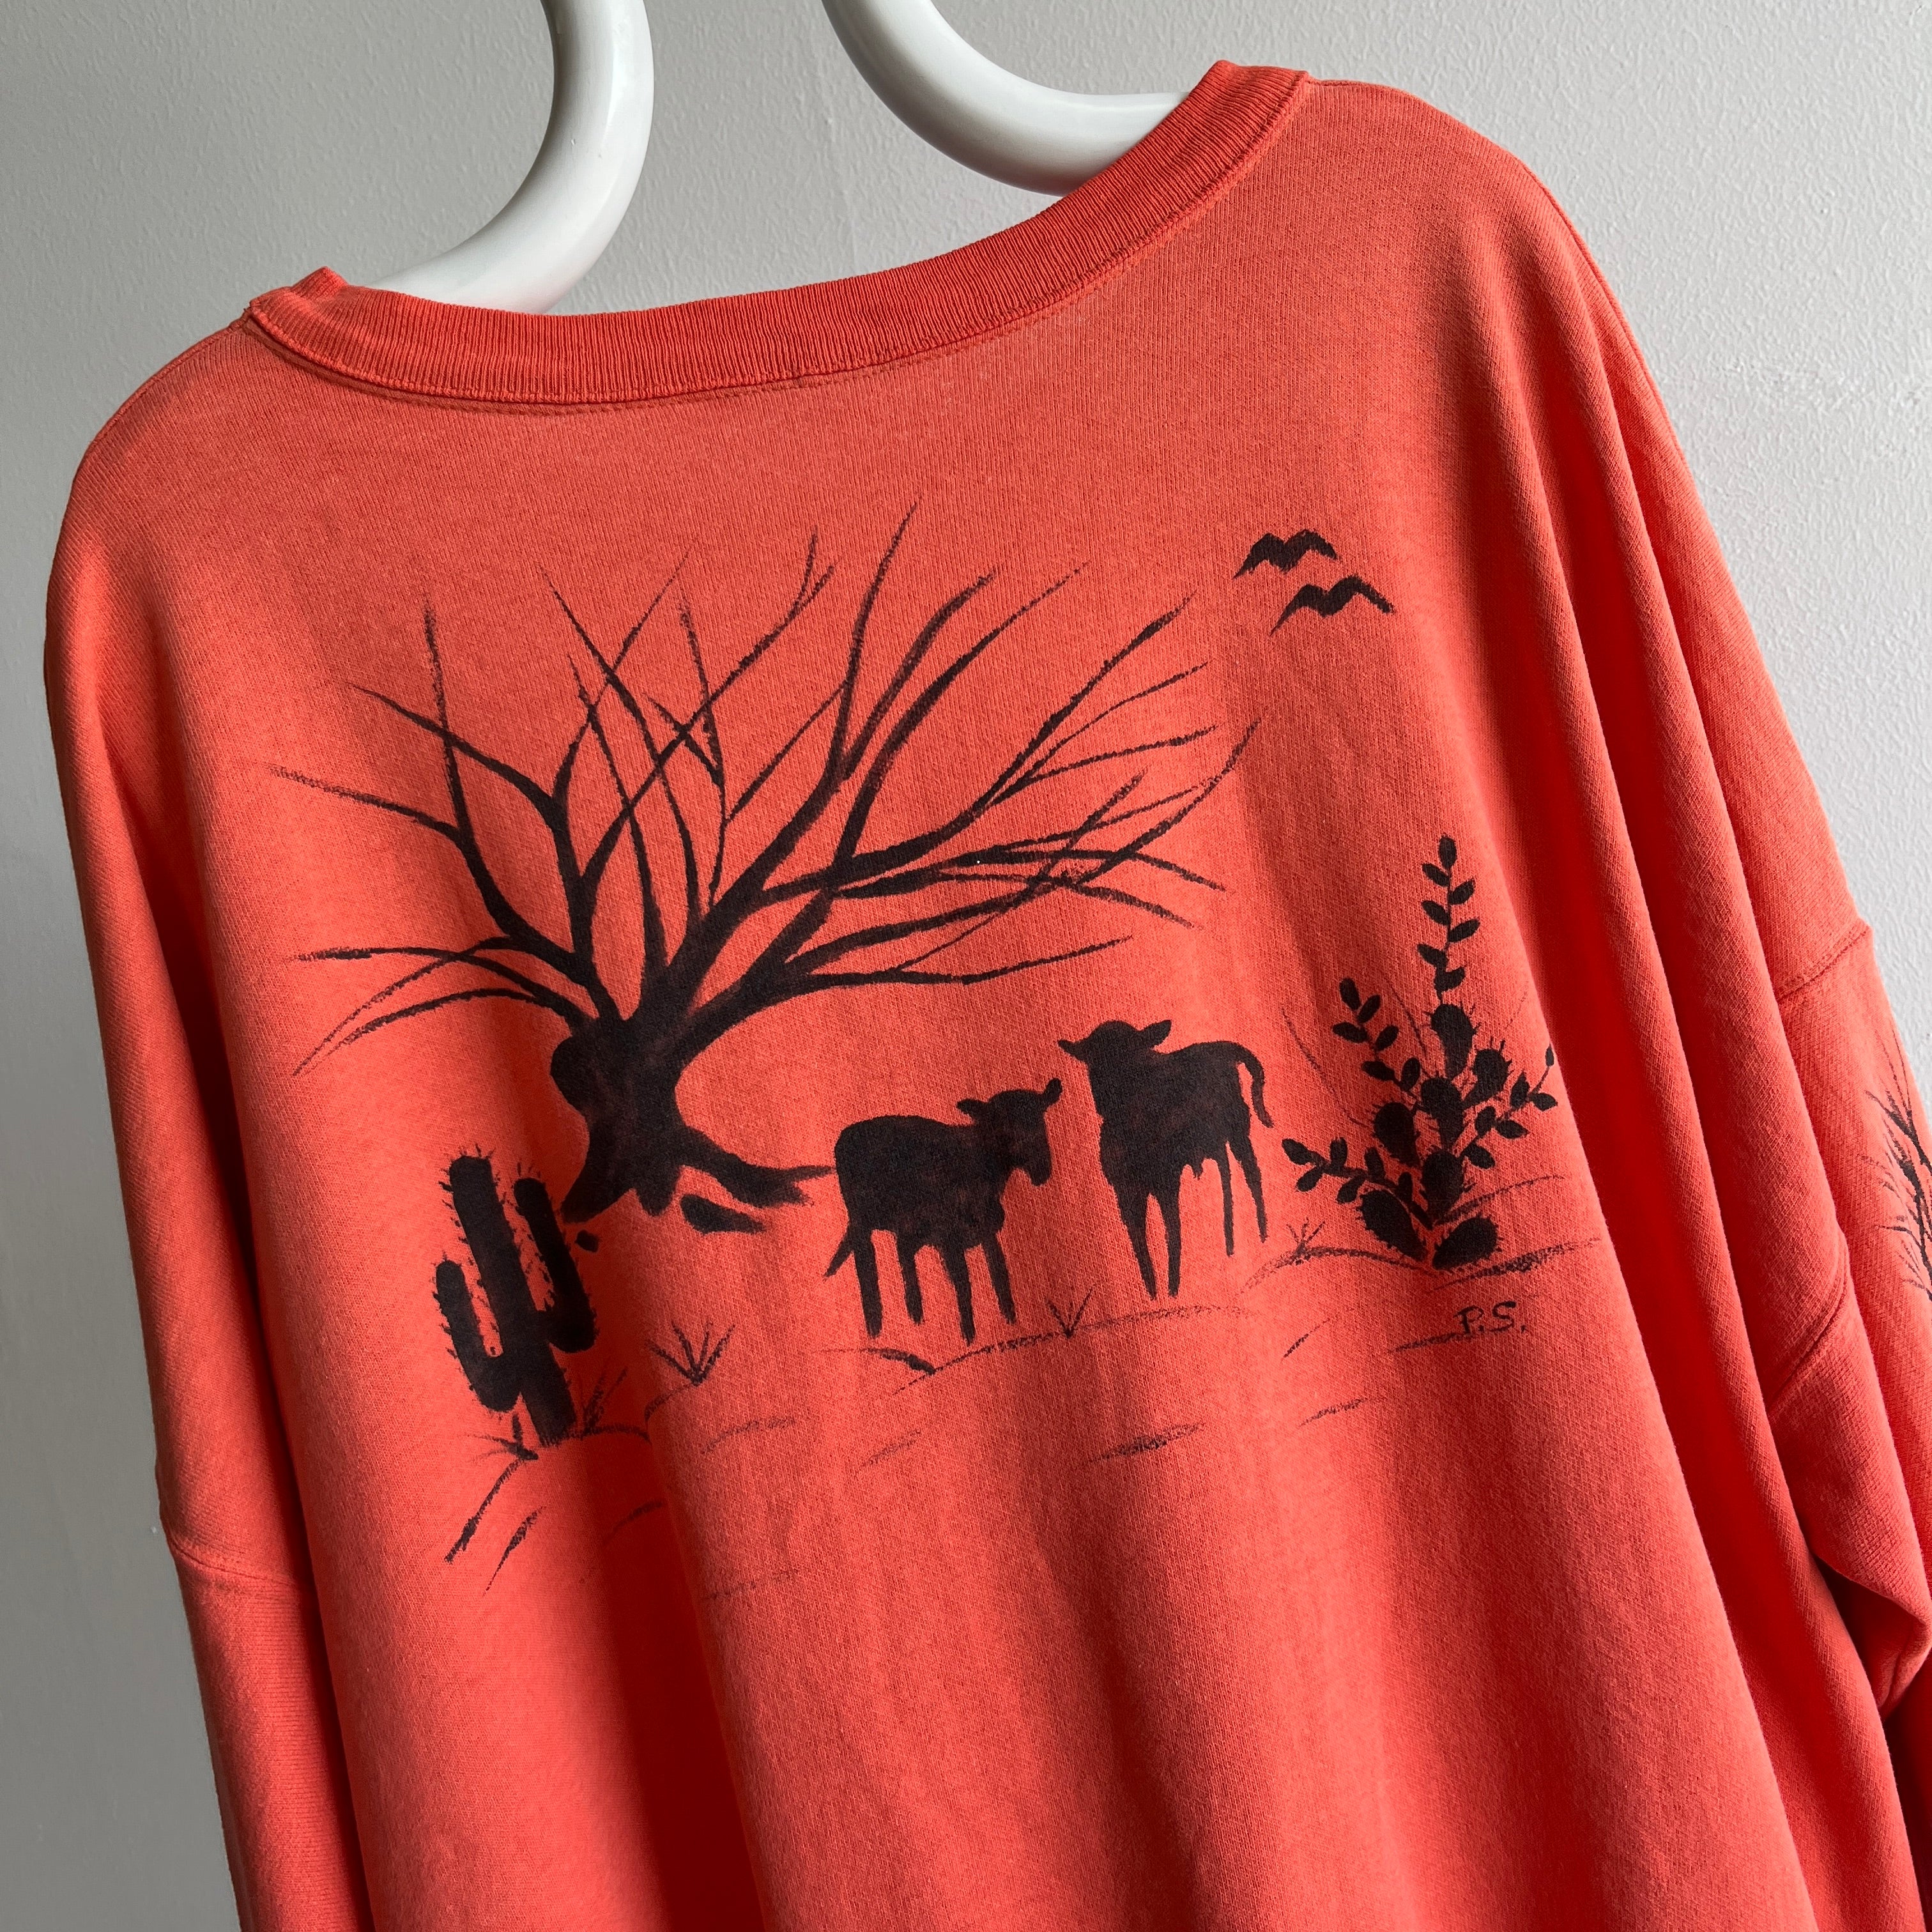 1980s DIY (?) Farm Scene Front, Back and Arm Super Thin and Slouchy Larger Orange Sweatshirt